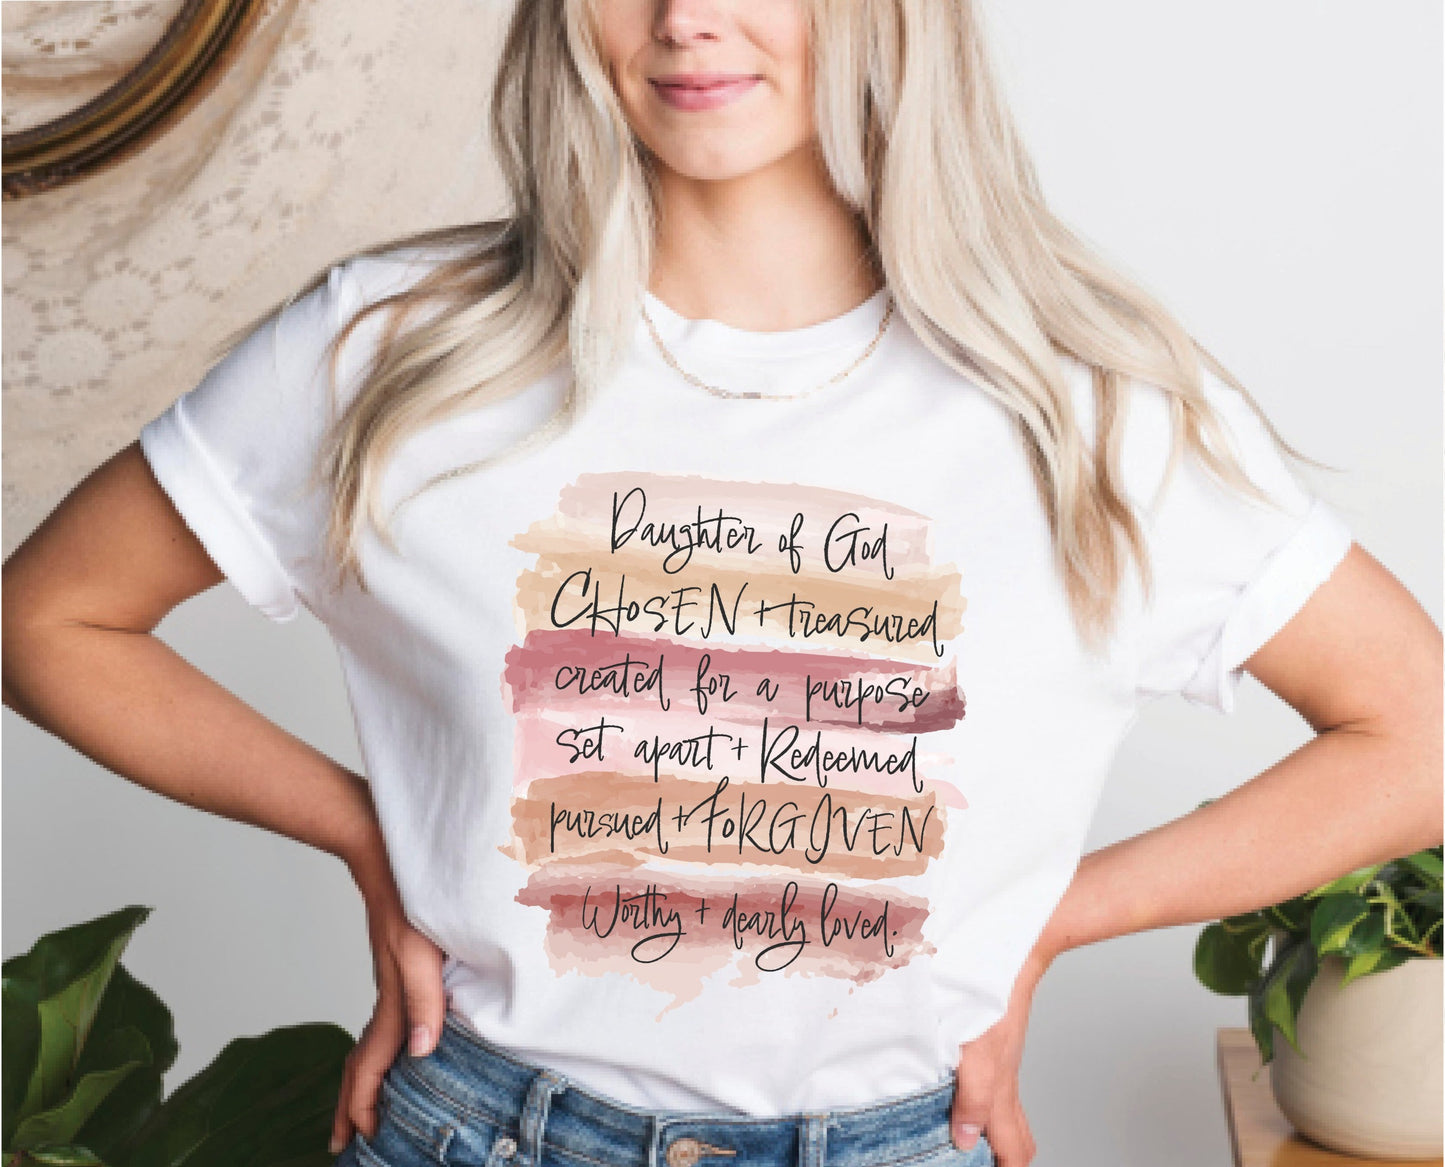 Daughter of God, Chosen, created for a purpose, redeemed, forgiven, worthy, loved, Christian woman aesthetic with neutral colors watercolor splash background printed on soft white unisex t-shirt for women